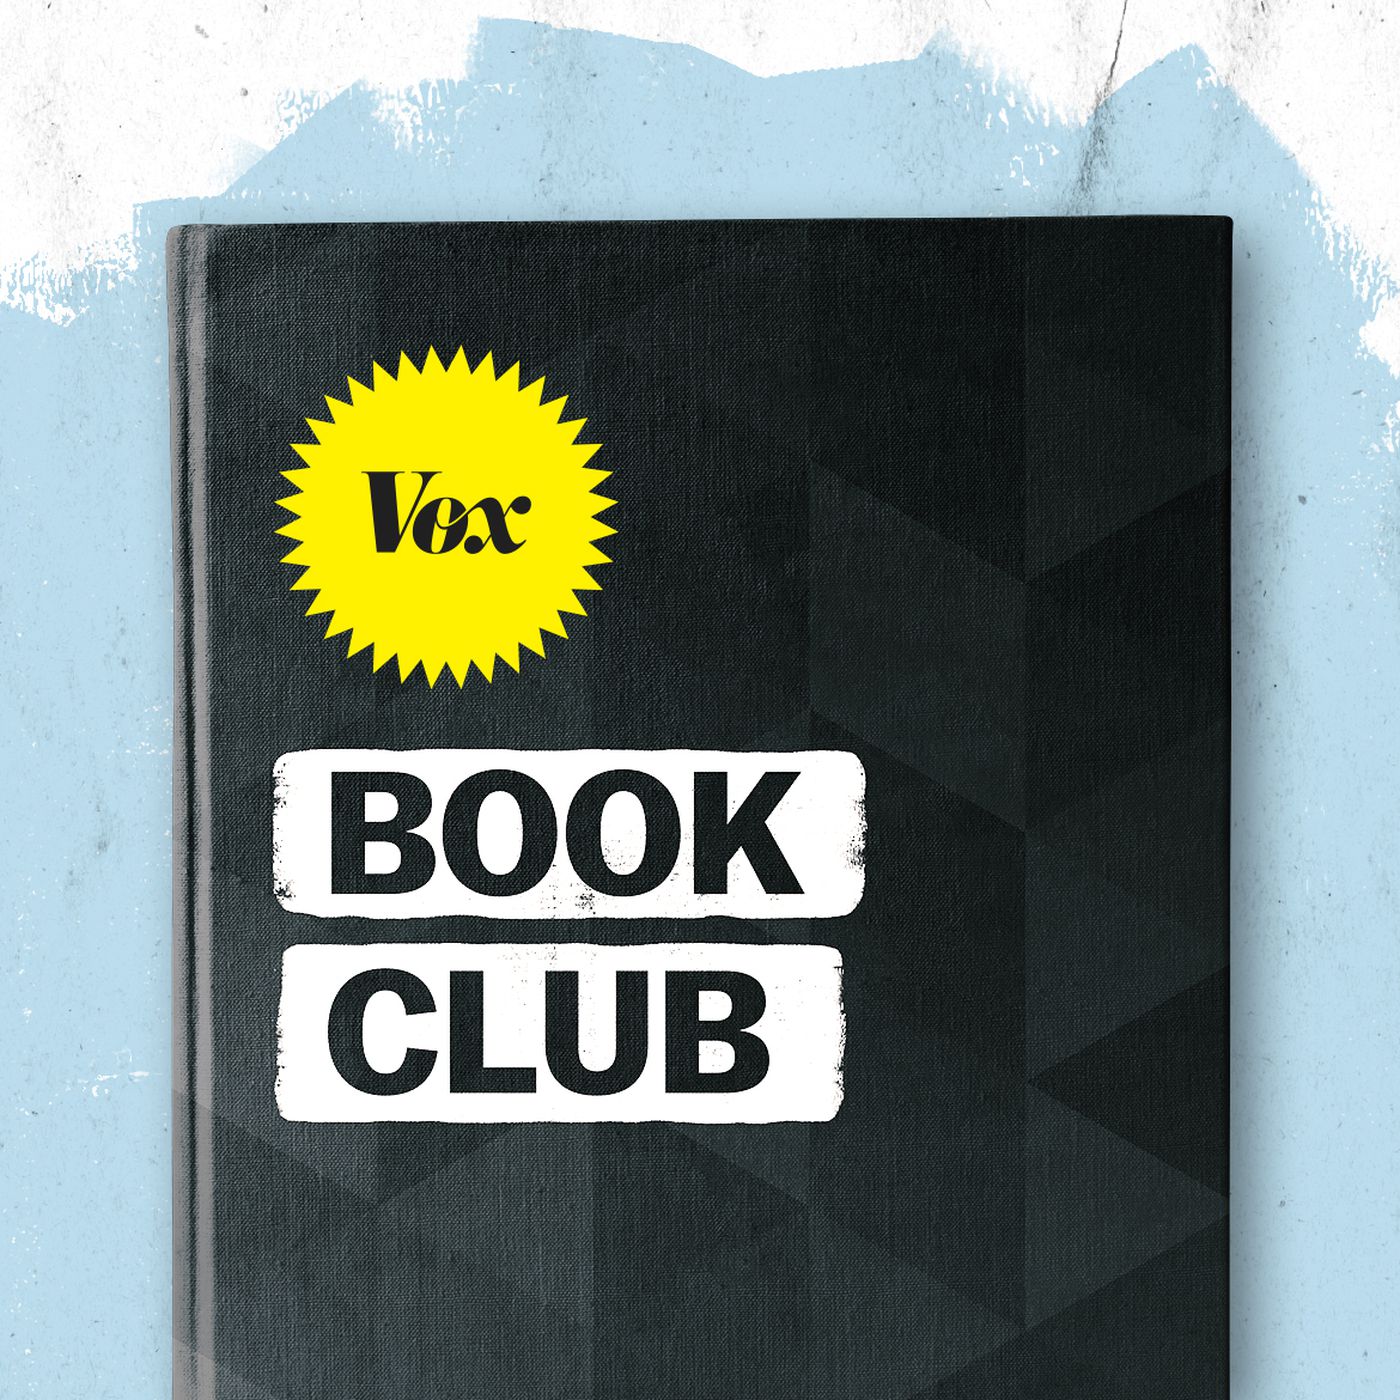 The Vox Book Club Pick For May Is Donna Tartt S The Secret History